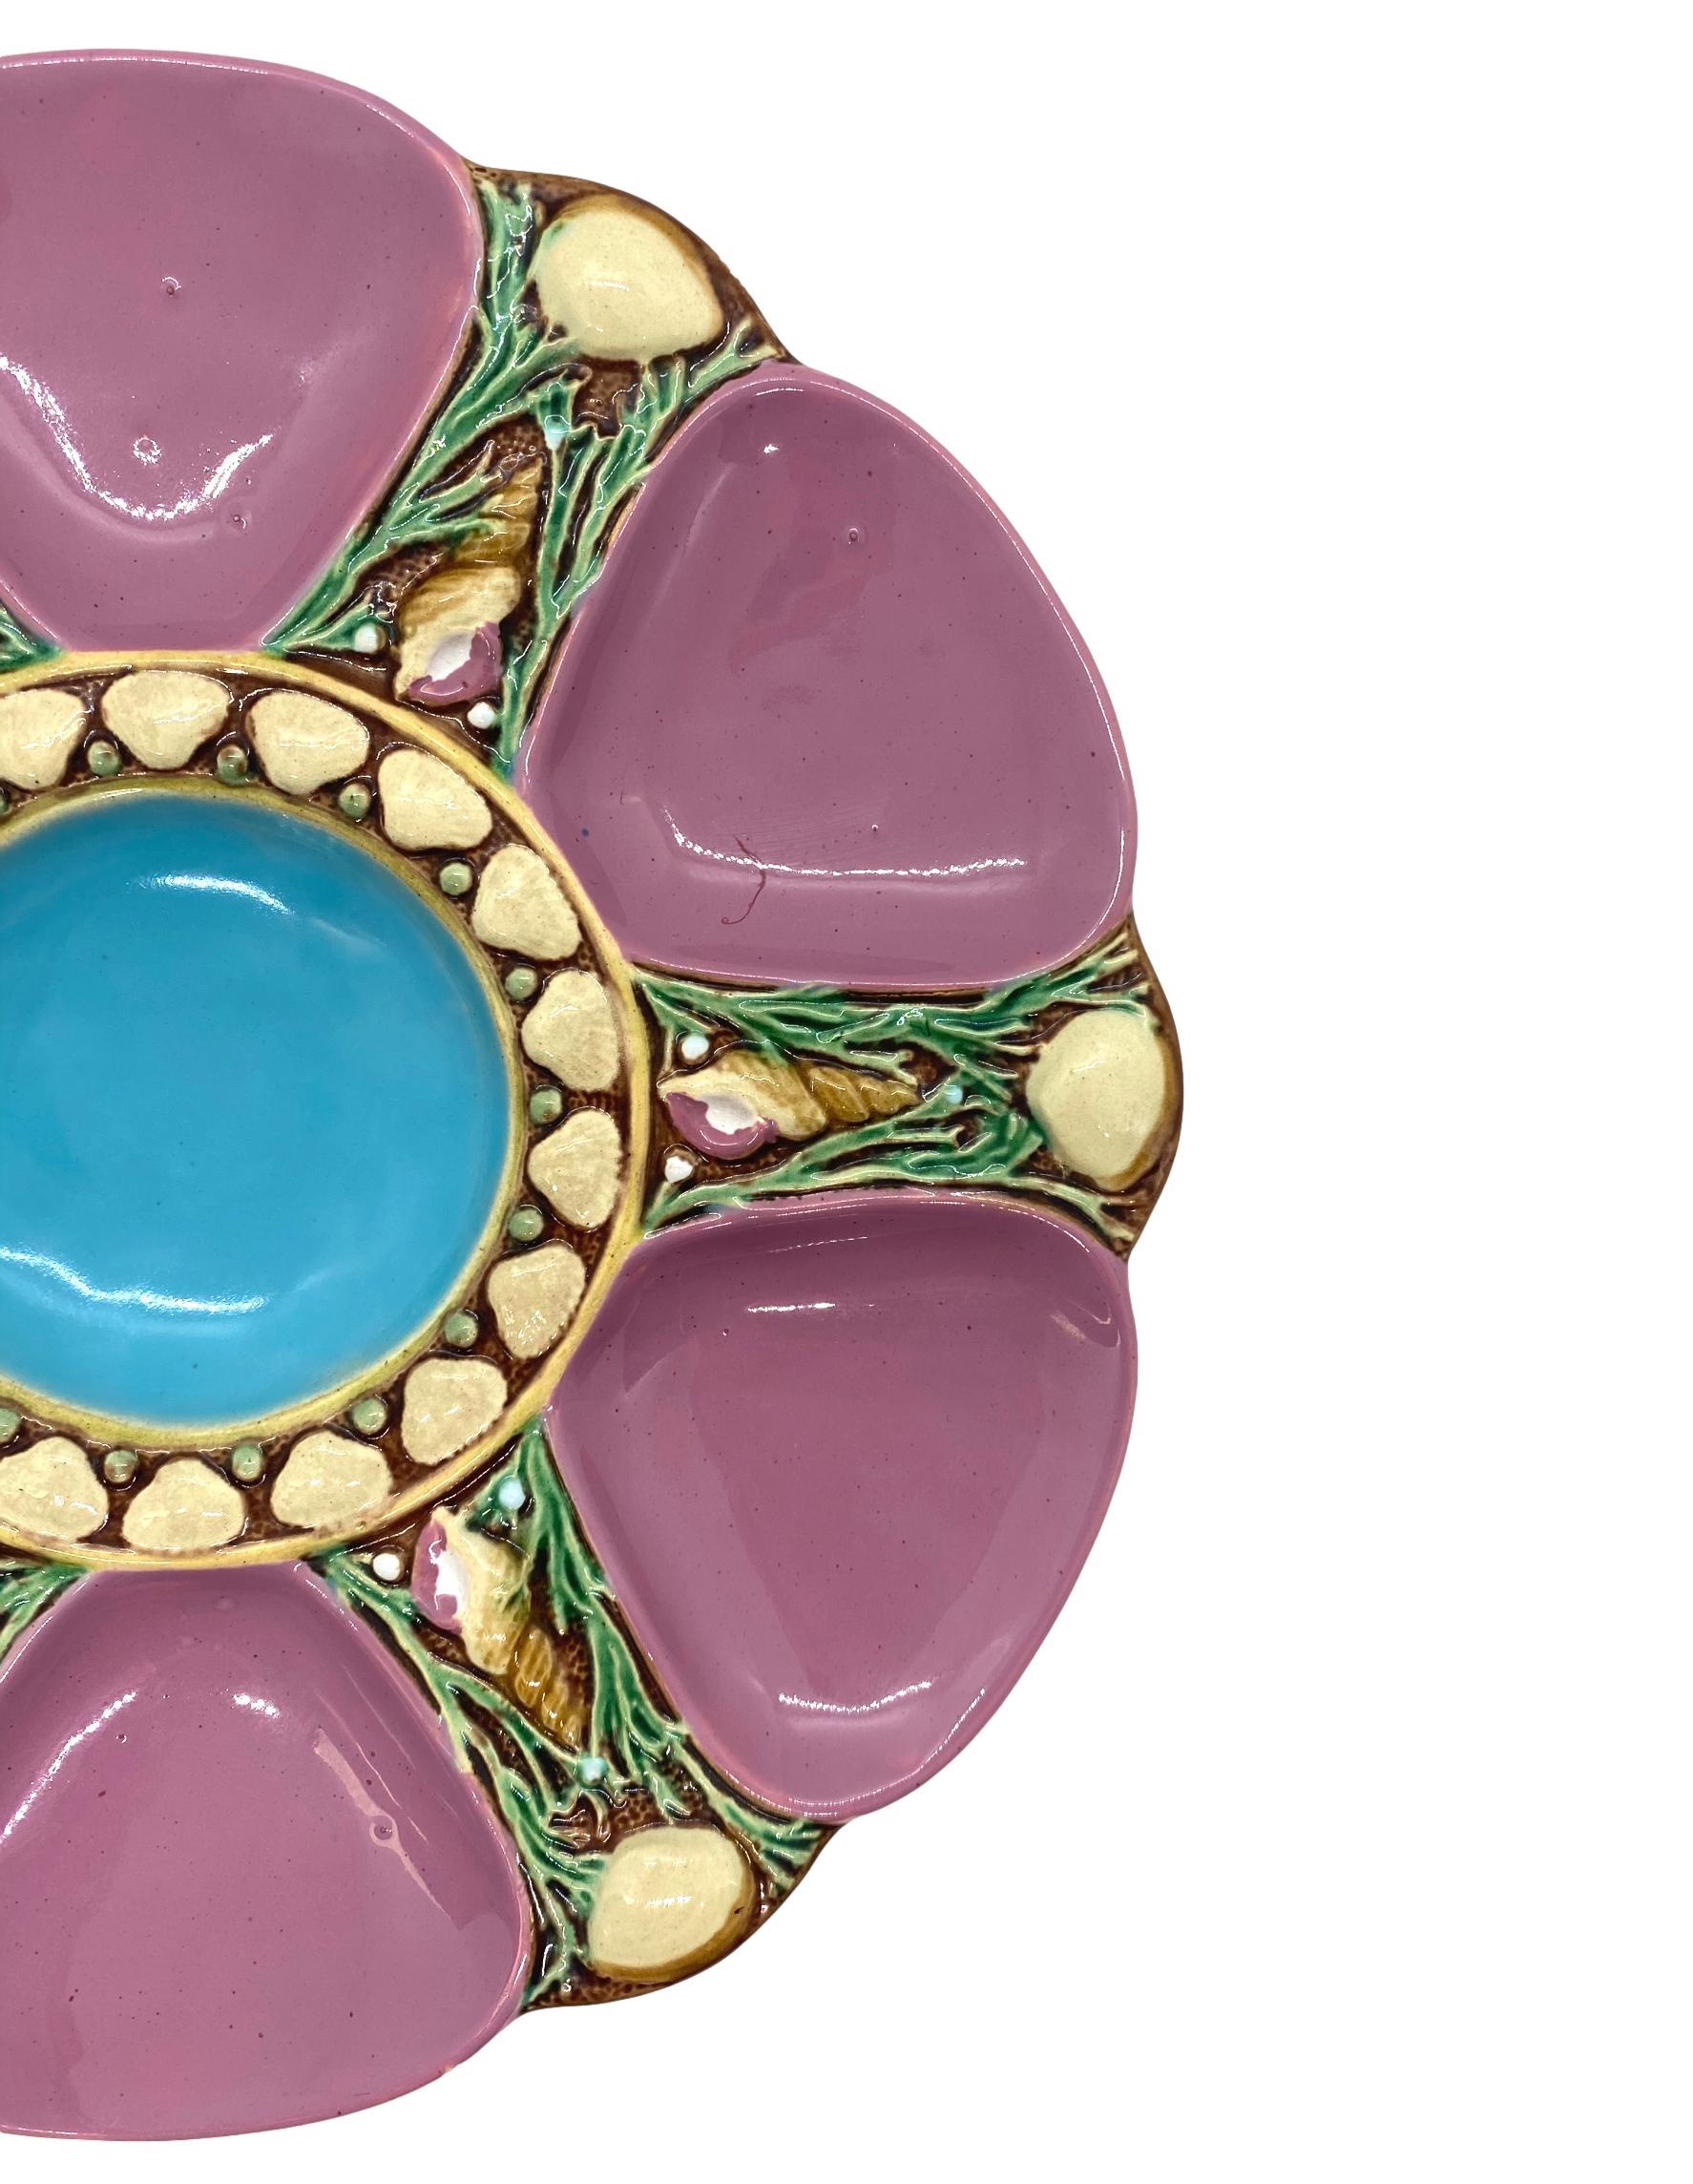 Molded Minton Majolica Pink Oyster Plate, circa 1873